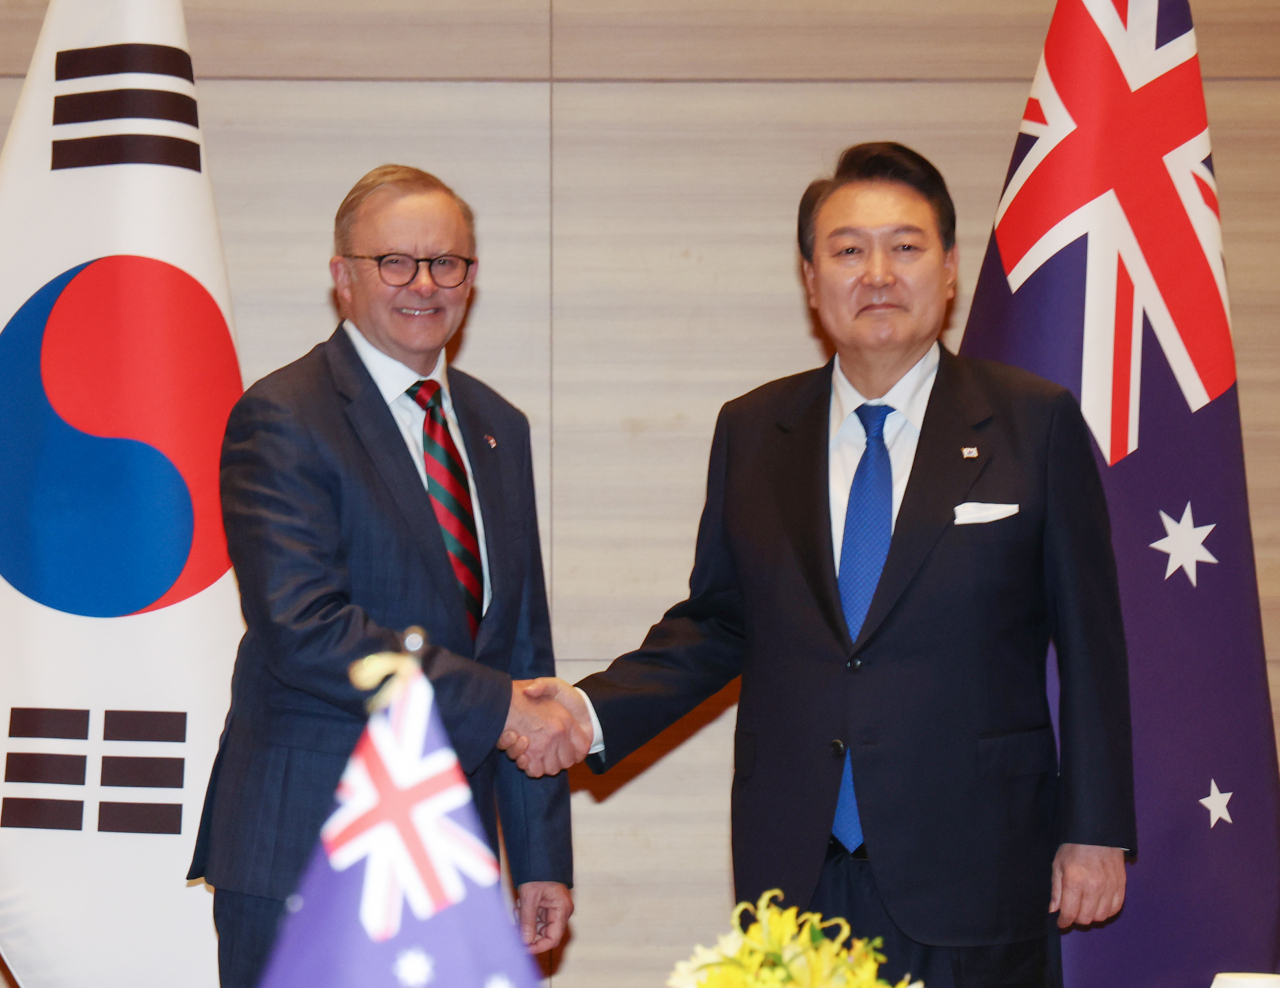 South Korean President Yoon Suk Yeol (R) and Australian Prime Minister Anthony Albanese shake hands during their summit at a hotel in Hiroshima, Japan, on Friday. (Yonhap)